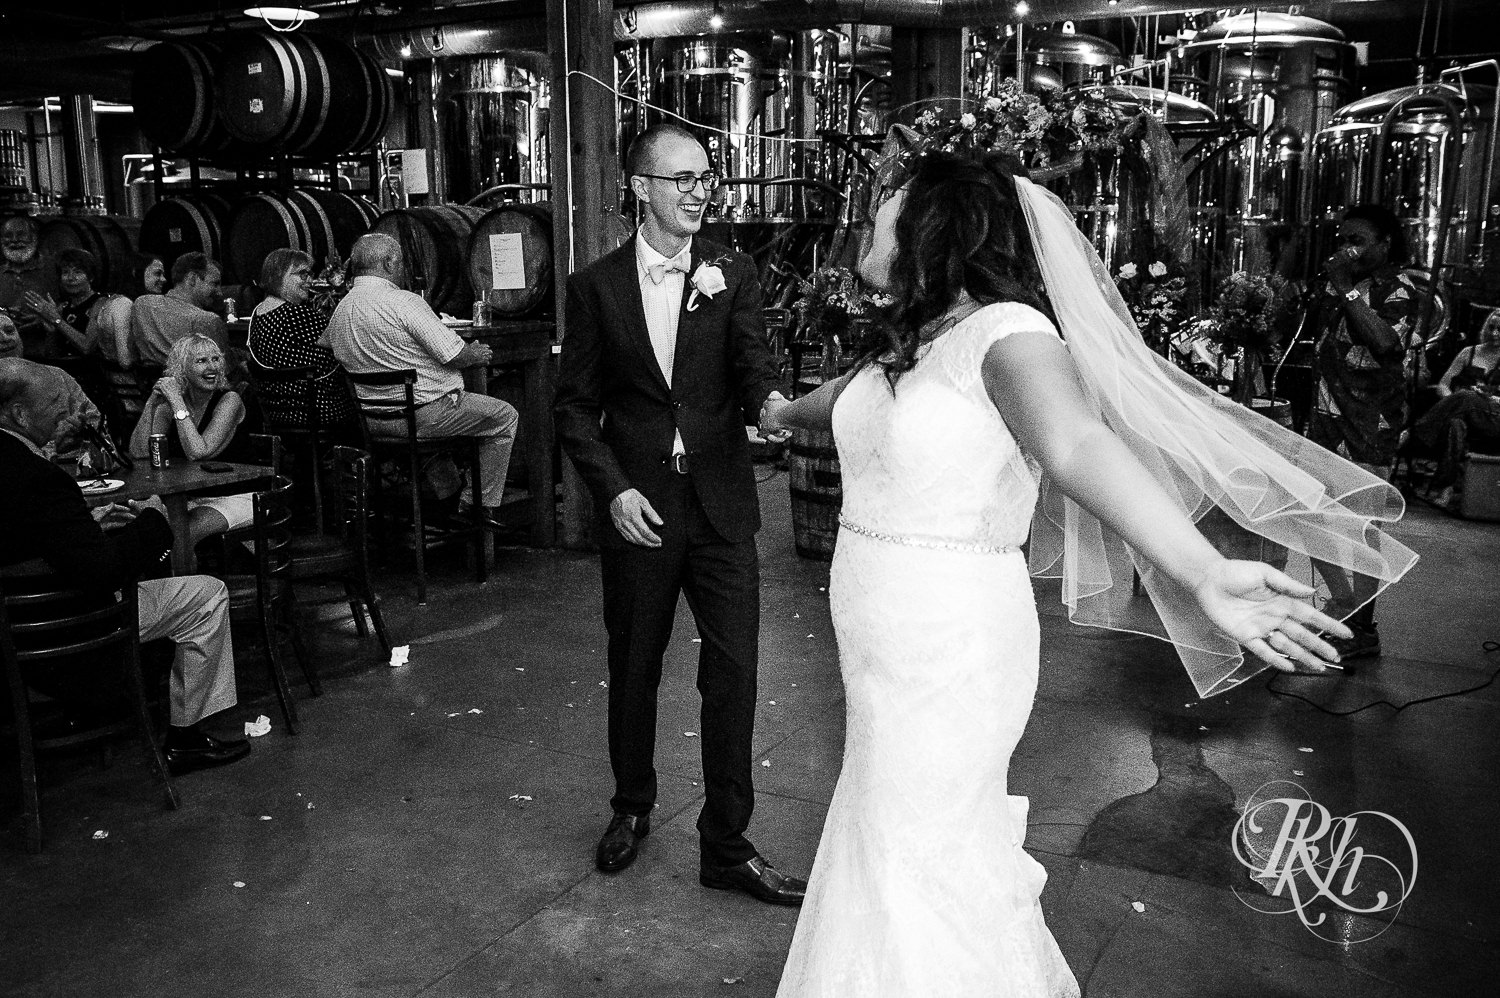 Bride and groom dance during brewery wedding reception at 612 Brew in Minneapolis, Minnesota.